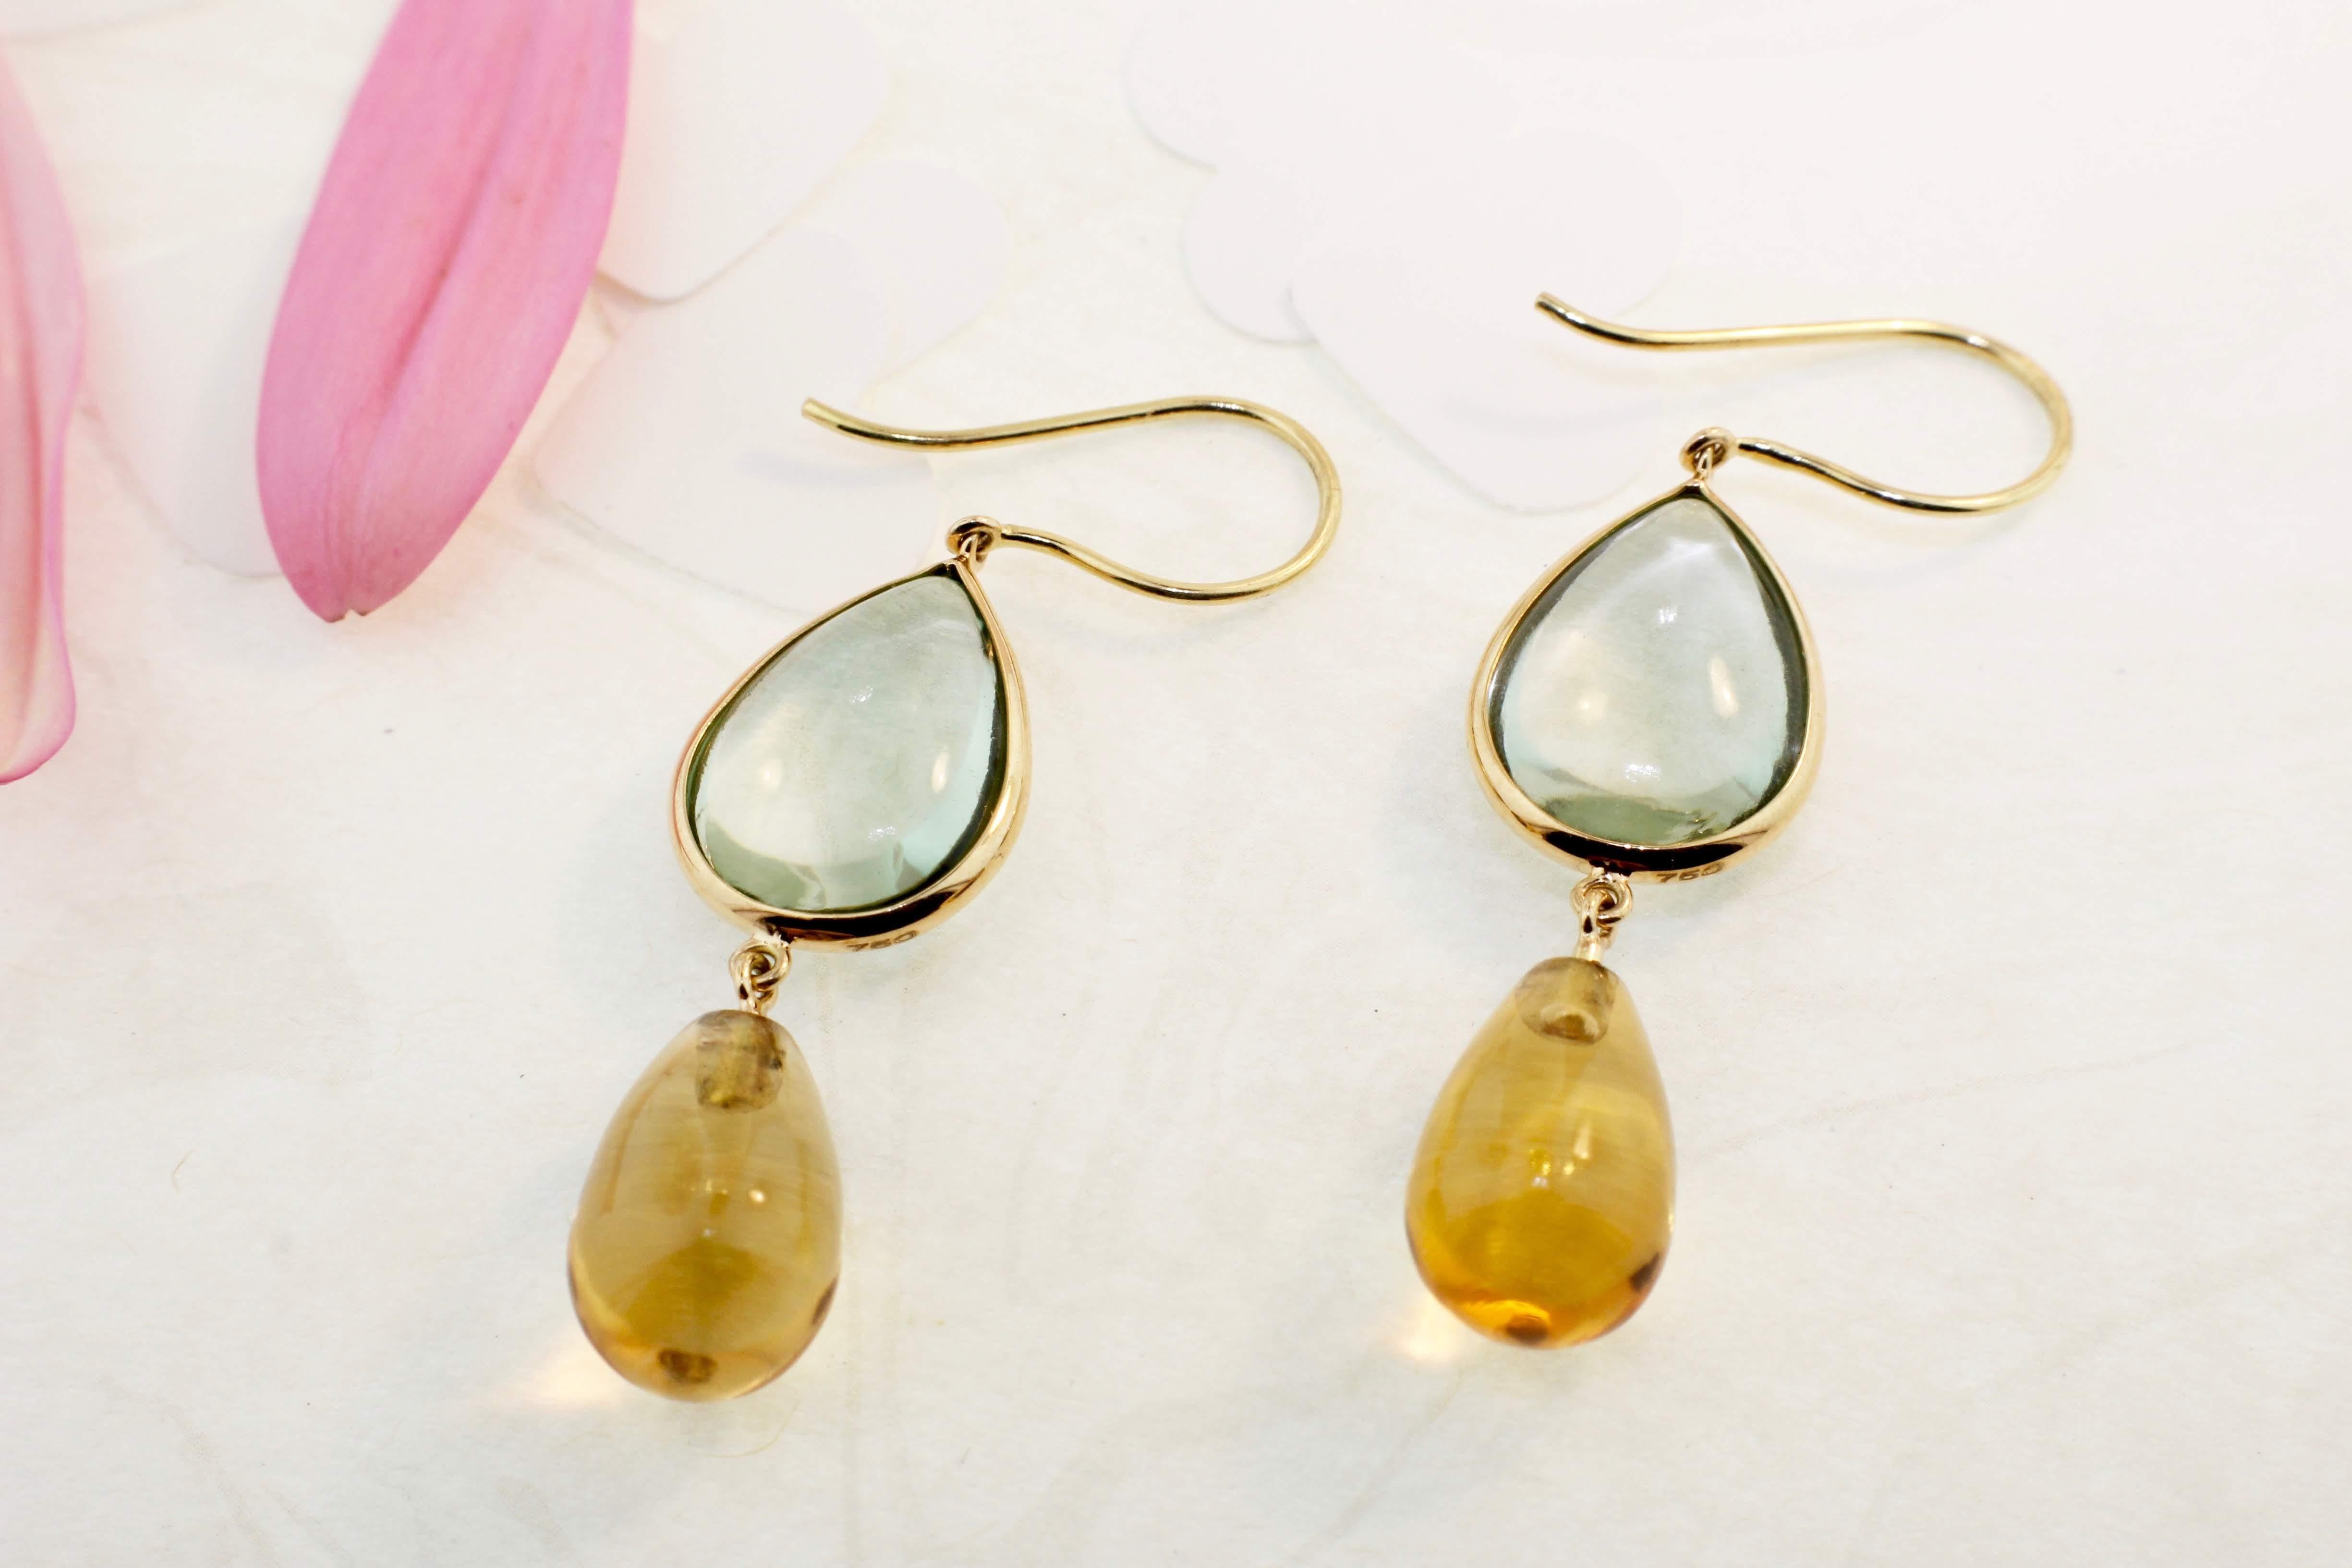 Cabochon Nari Fine Jewels Handcrafted Dangle Earrings with Blue Topaz and Citrine in 18k For Sale